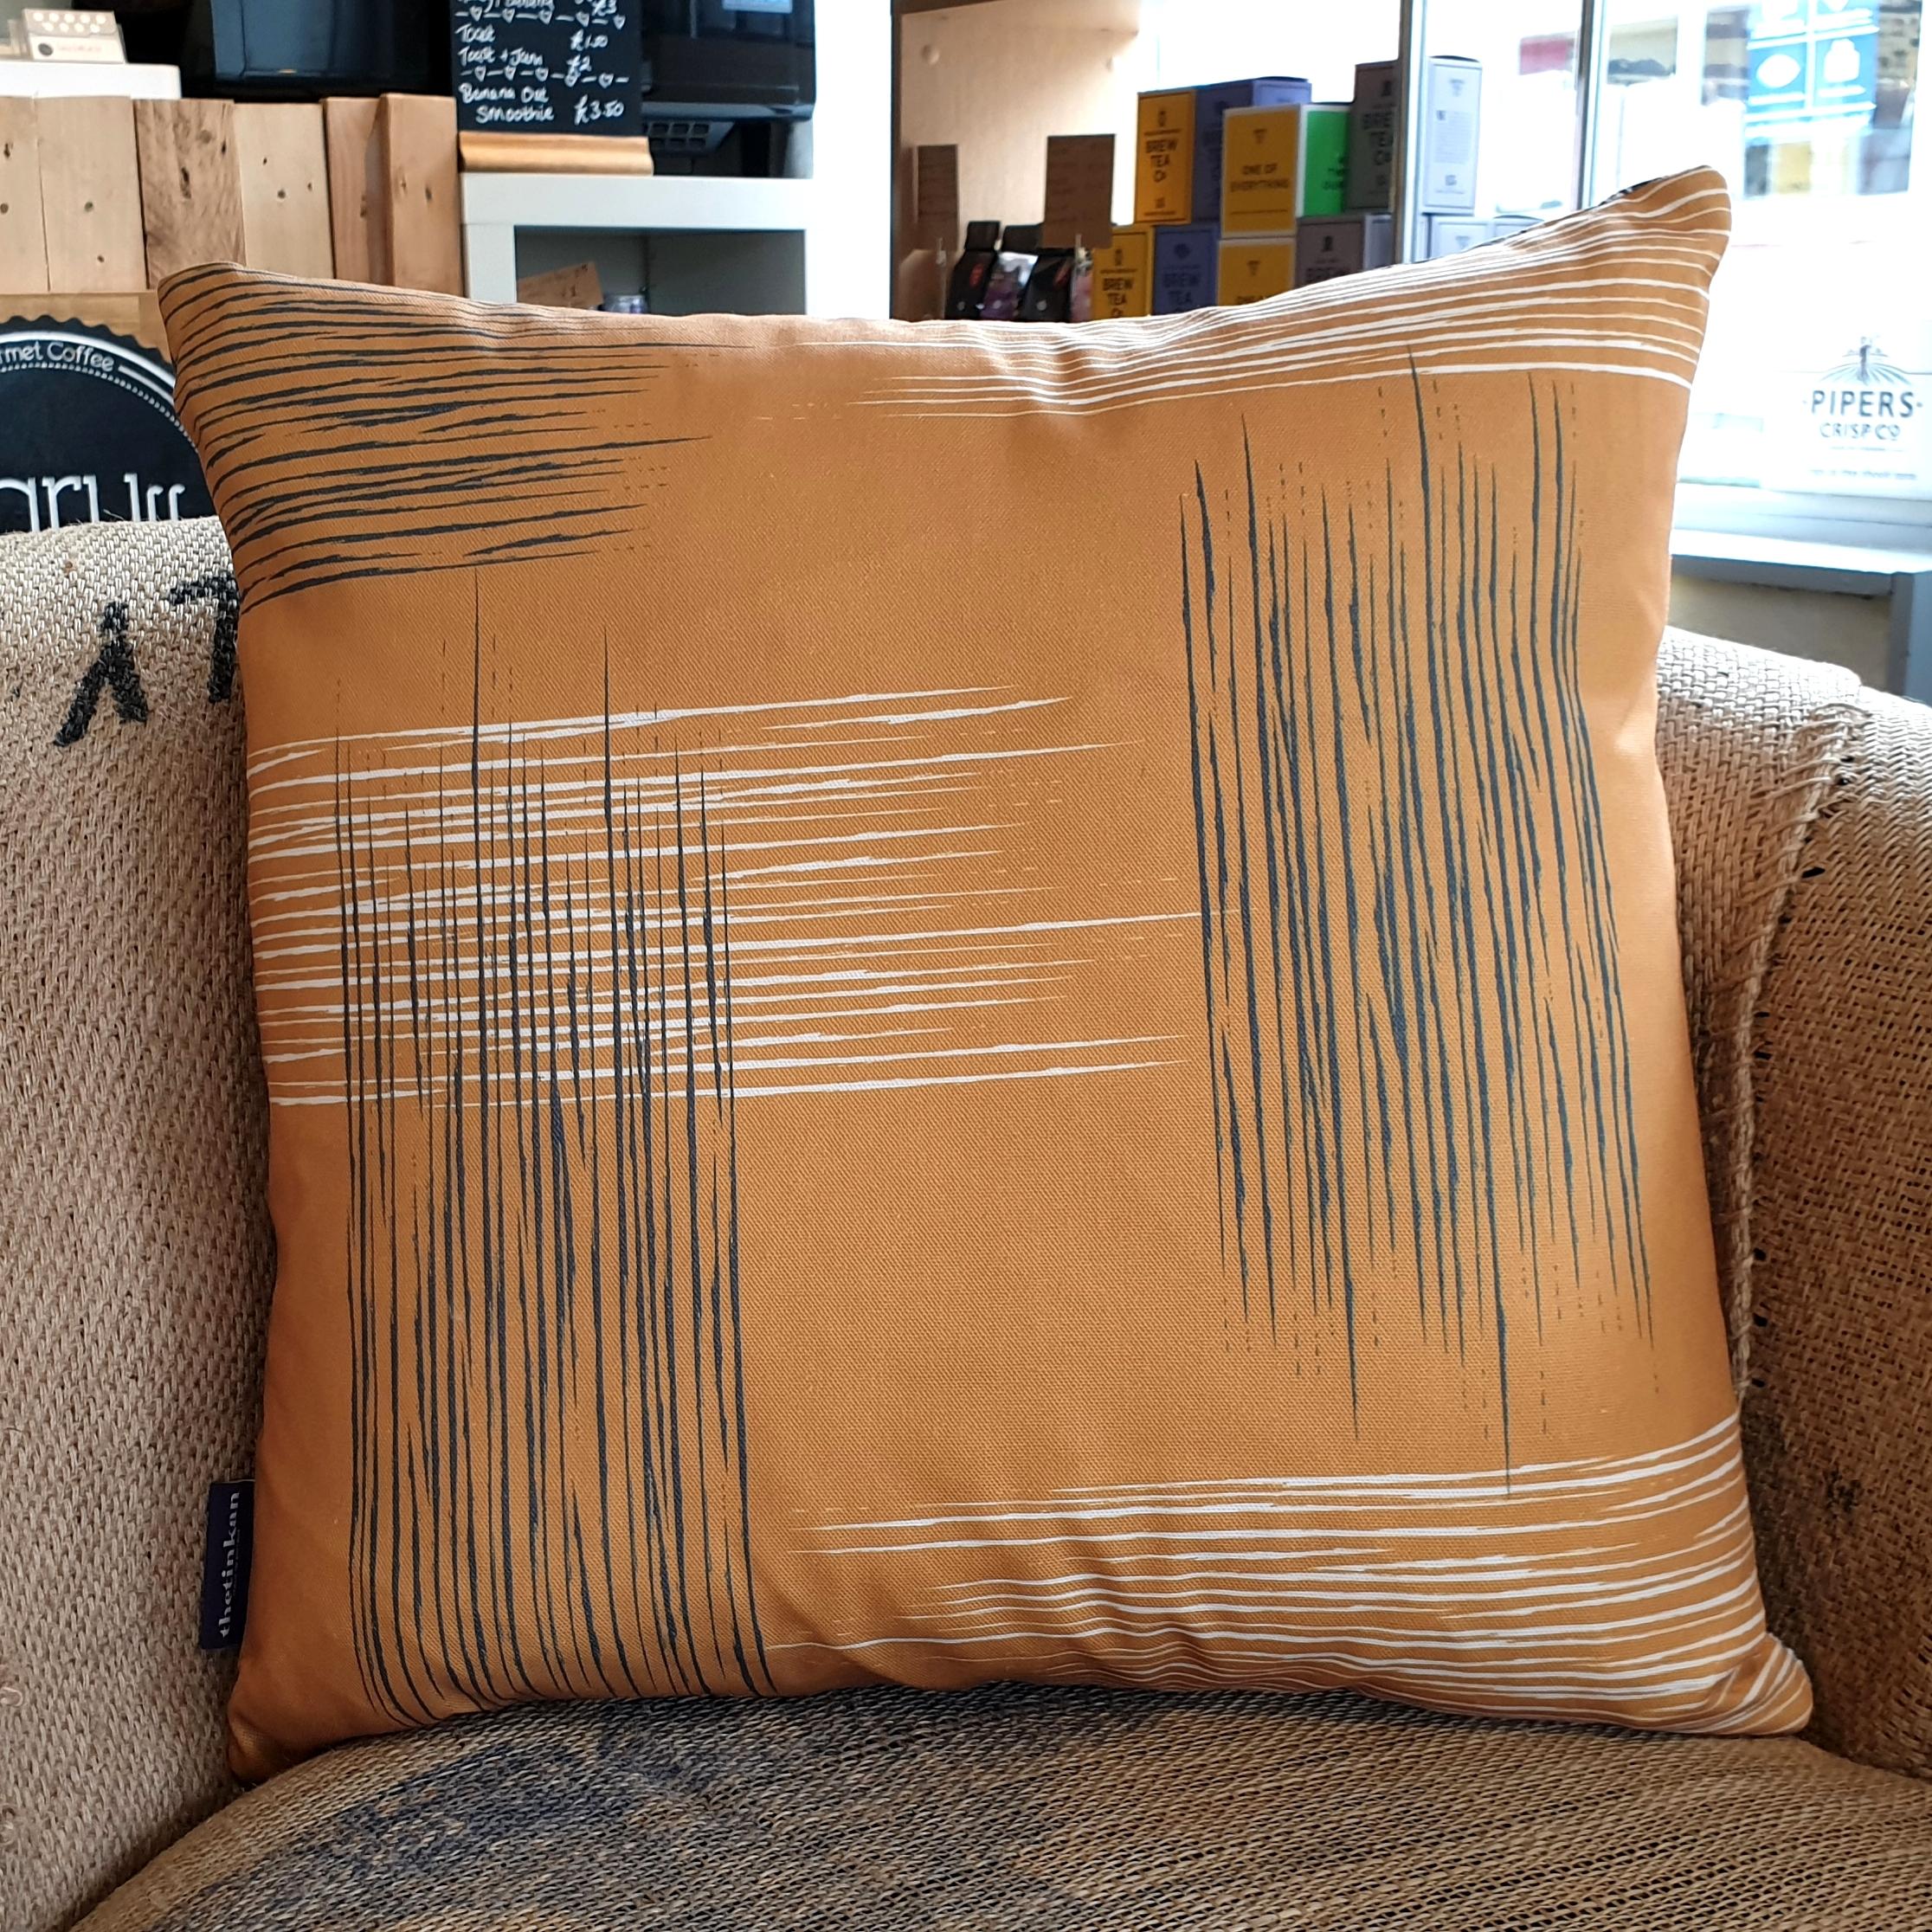 Double-sided mustard yellow 45cm square retro themed cushion with artistic grey and white shards designed by thetinkan. Available with an optional luxury cushion inner pad. VIEW PRODUCT >>